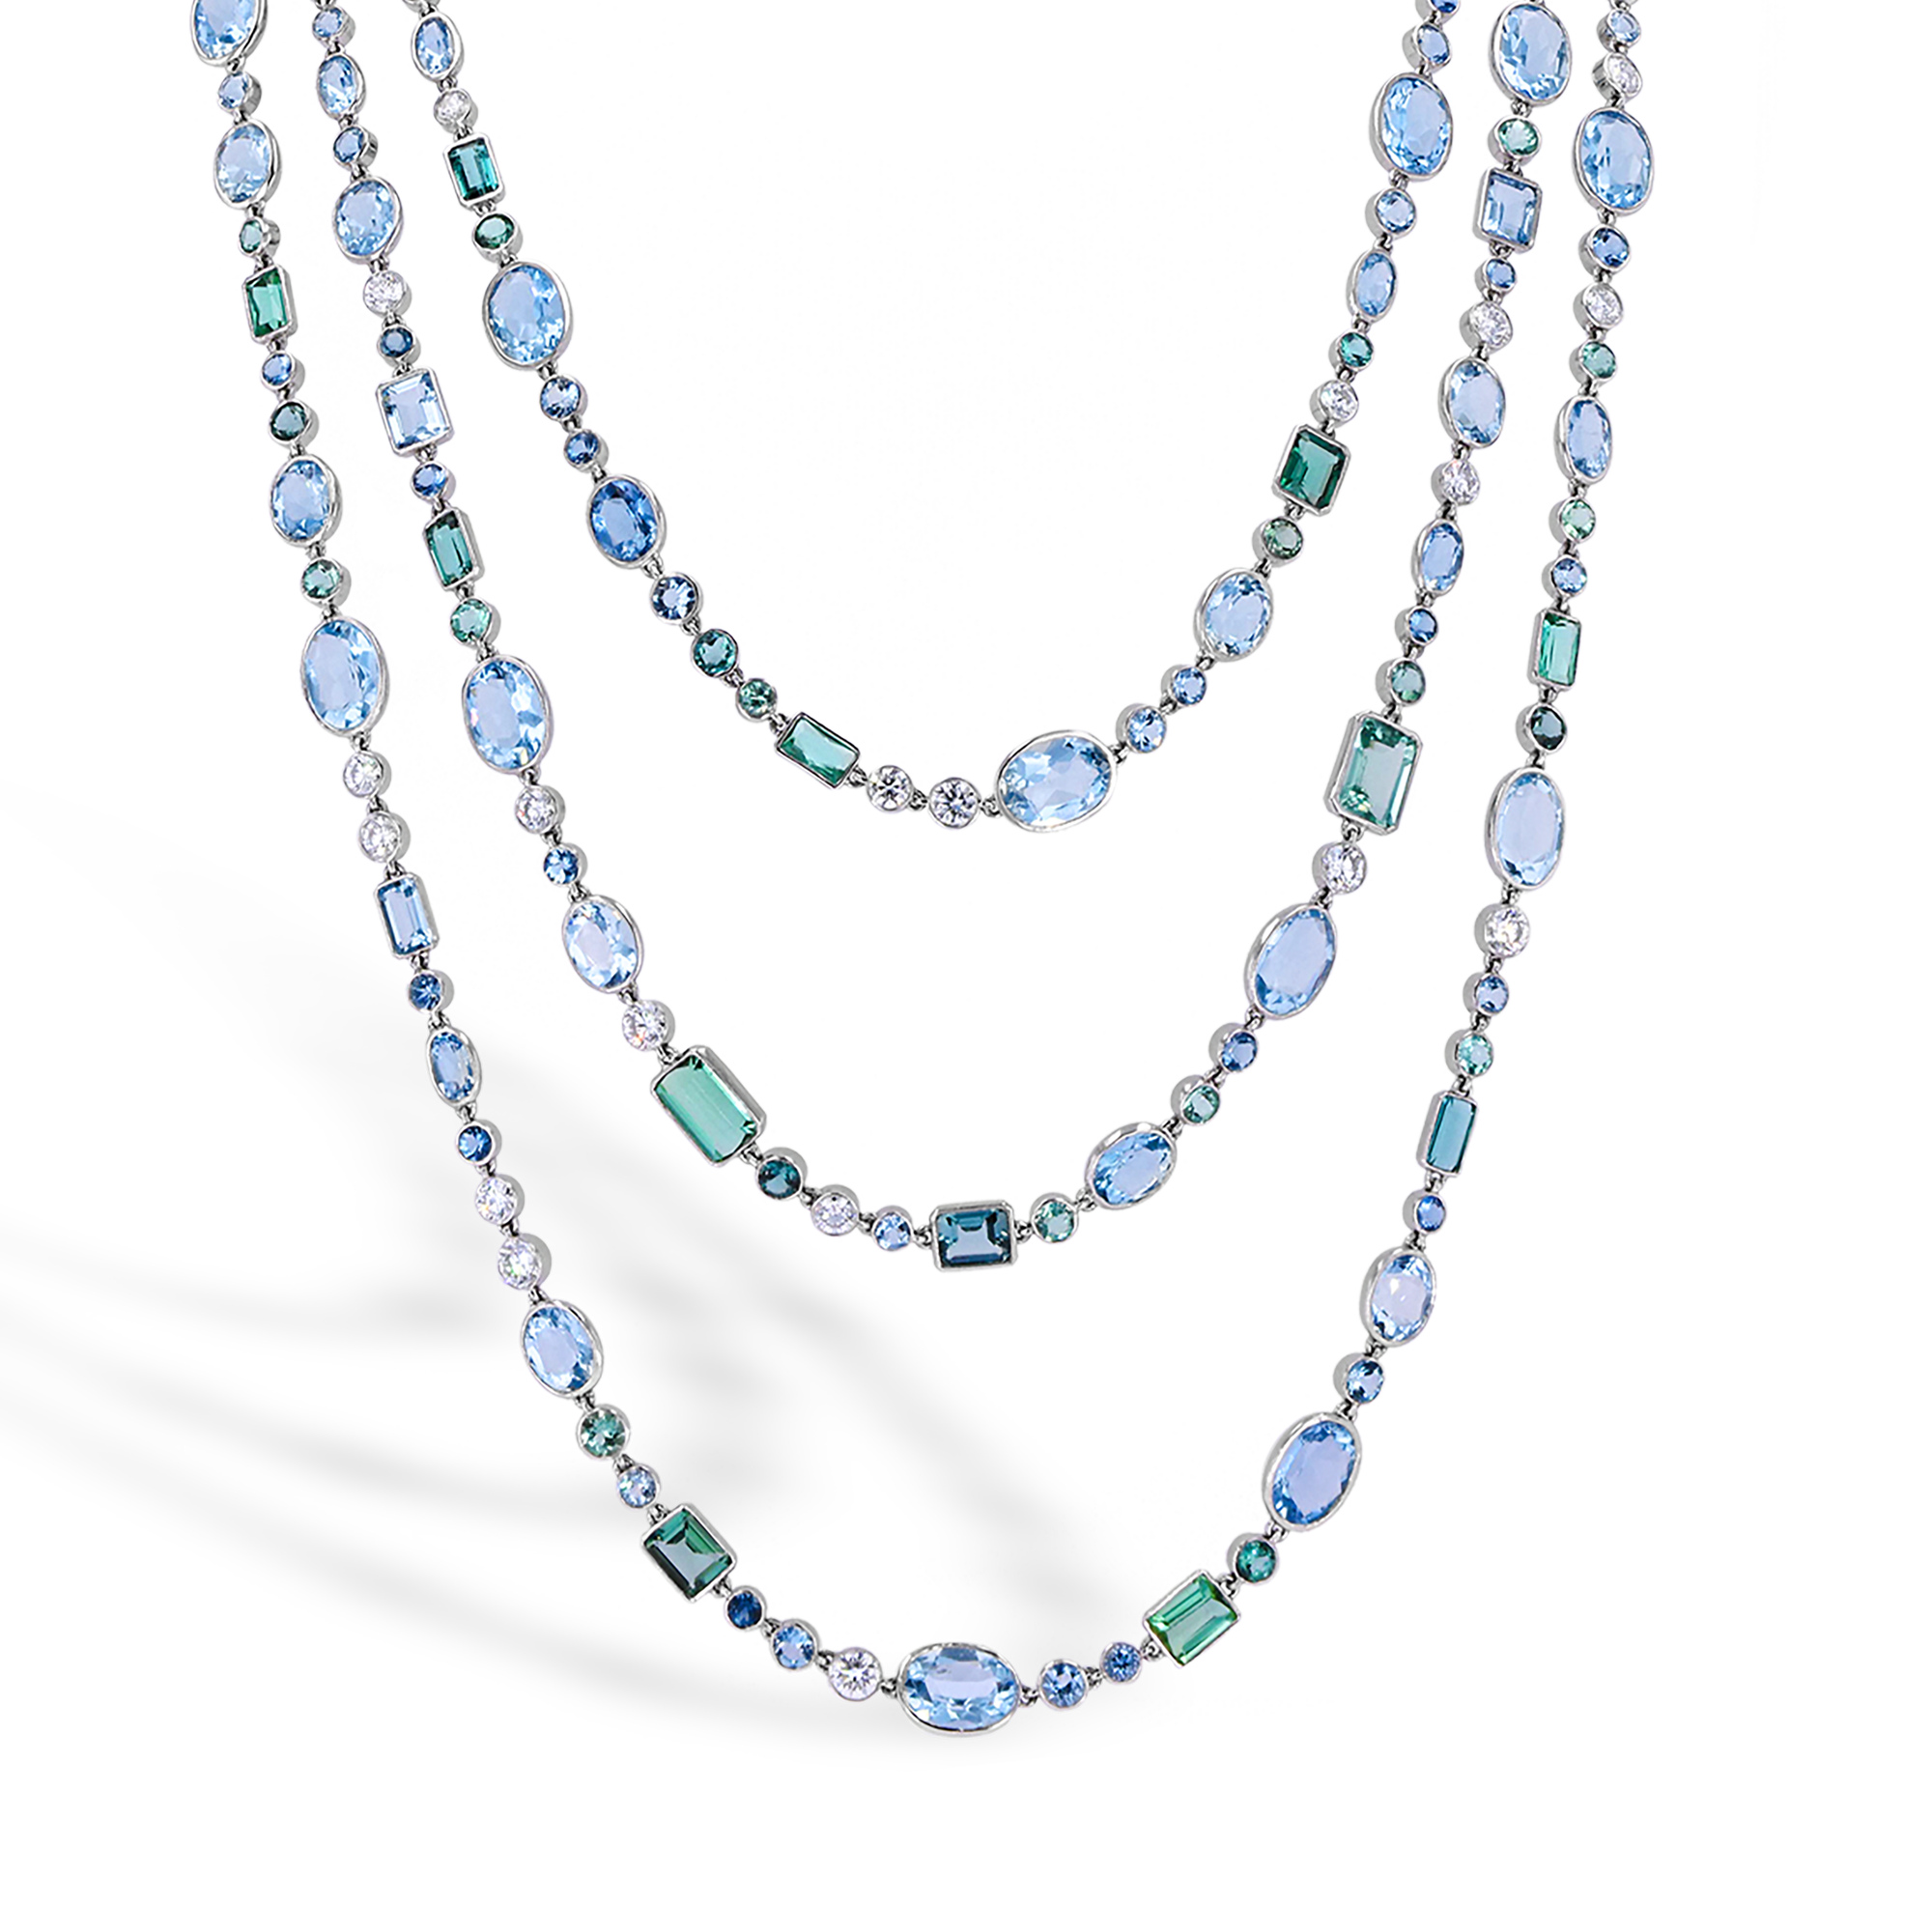 Masterpiece 180cm Aquamarine and Tourmaline Necklace Oval and Emerald Cut, Spectacle Set_2